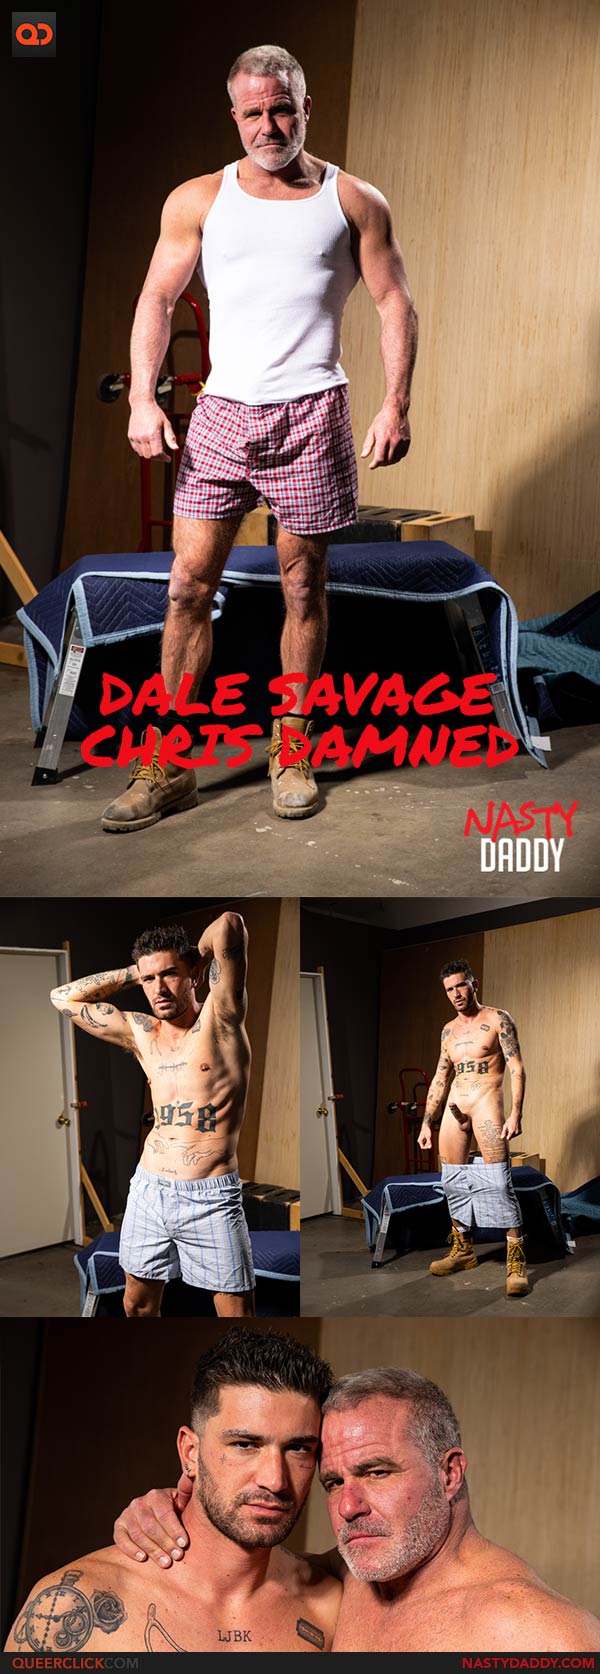 Nasty Daddy: Dale Savage and Chris Damned